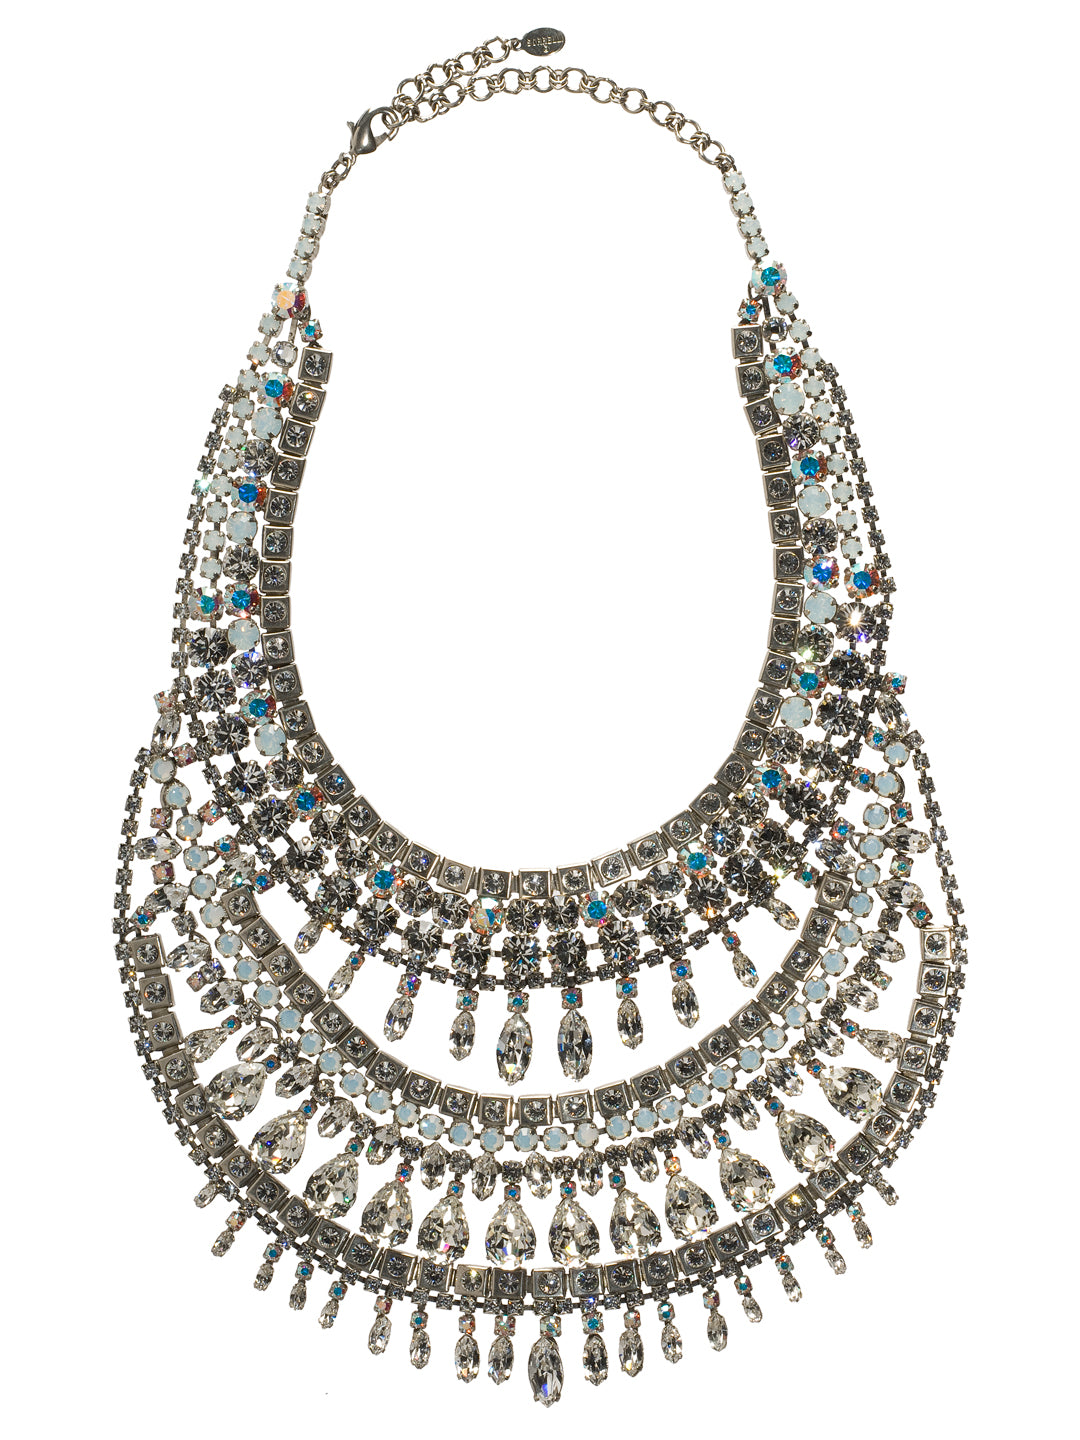 Silver Shade Statement Necklace - NSP6ASWBR - <p>Made purely with crystal, this necklace is layered in high-end, classic elegance. True to the Avant Garde collection, the Sorrelli Crystal Necklace is a work of art. Not for the faint of heart, prepare to be the center of attention whenever you decide to take this piece on a night out. From Sorrelli's White Bridal collection in our Antique Silver-tone finish.</p>